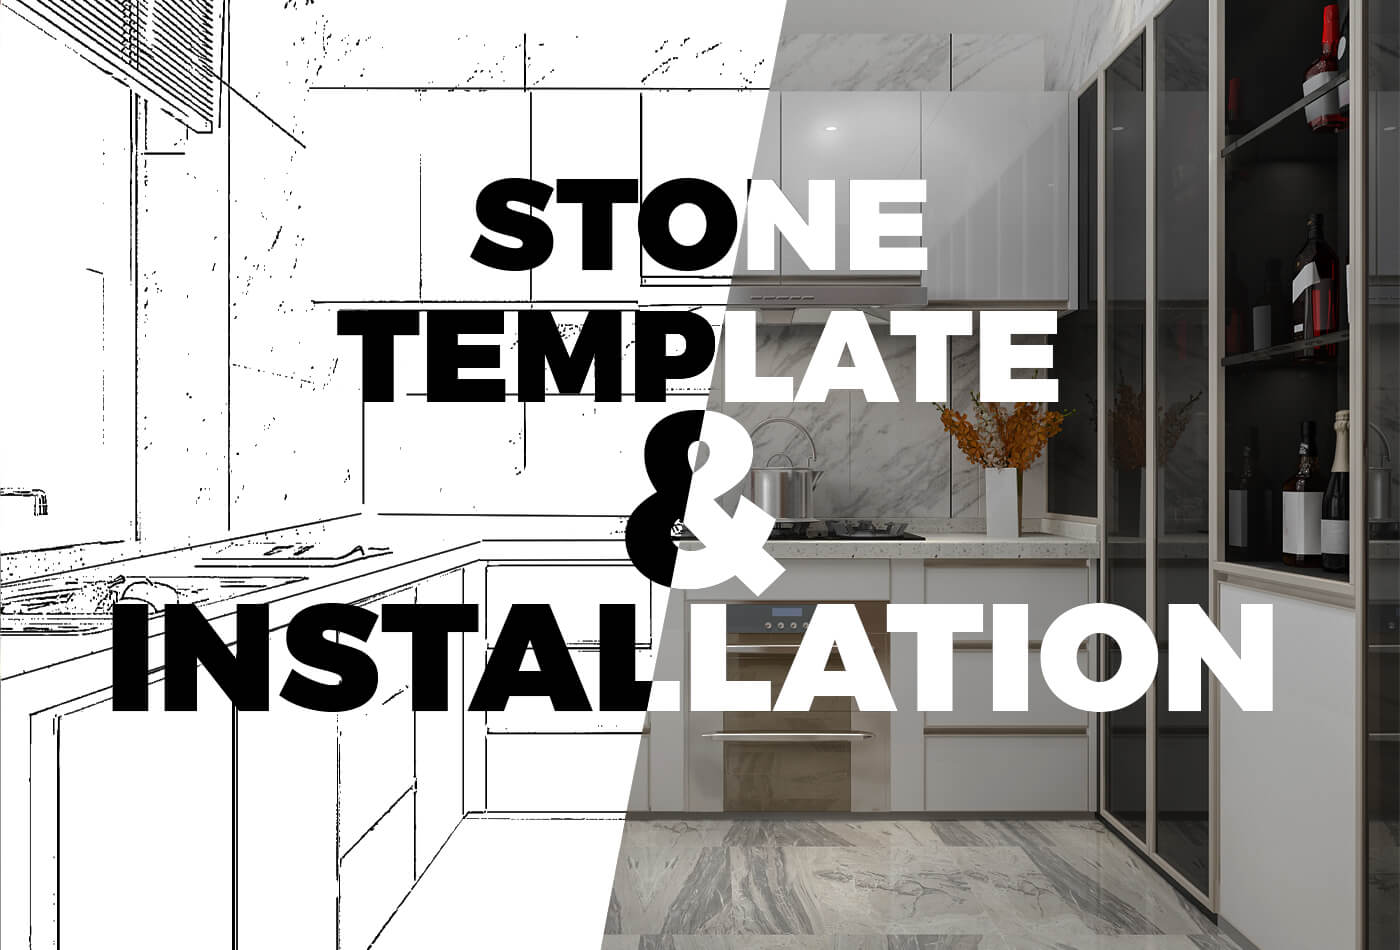 Stone Template & Installation: Journey Begins Like This!